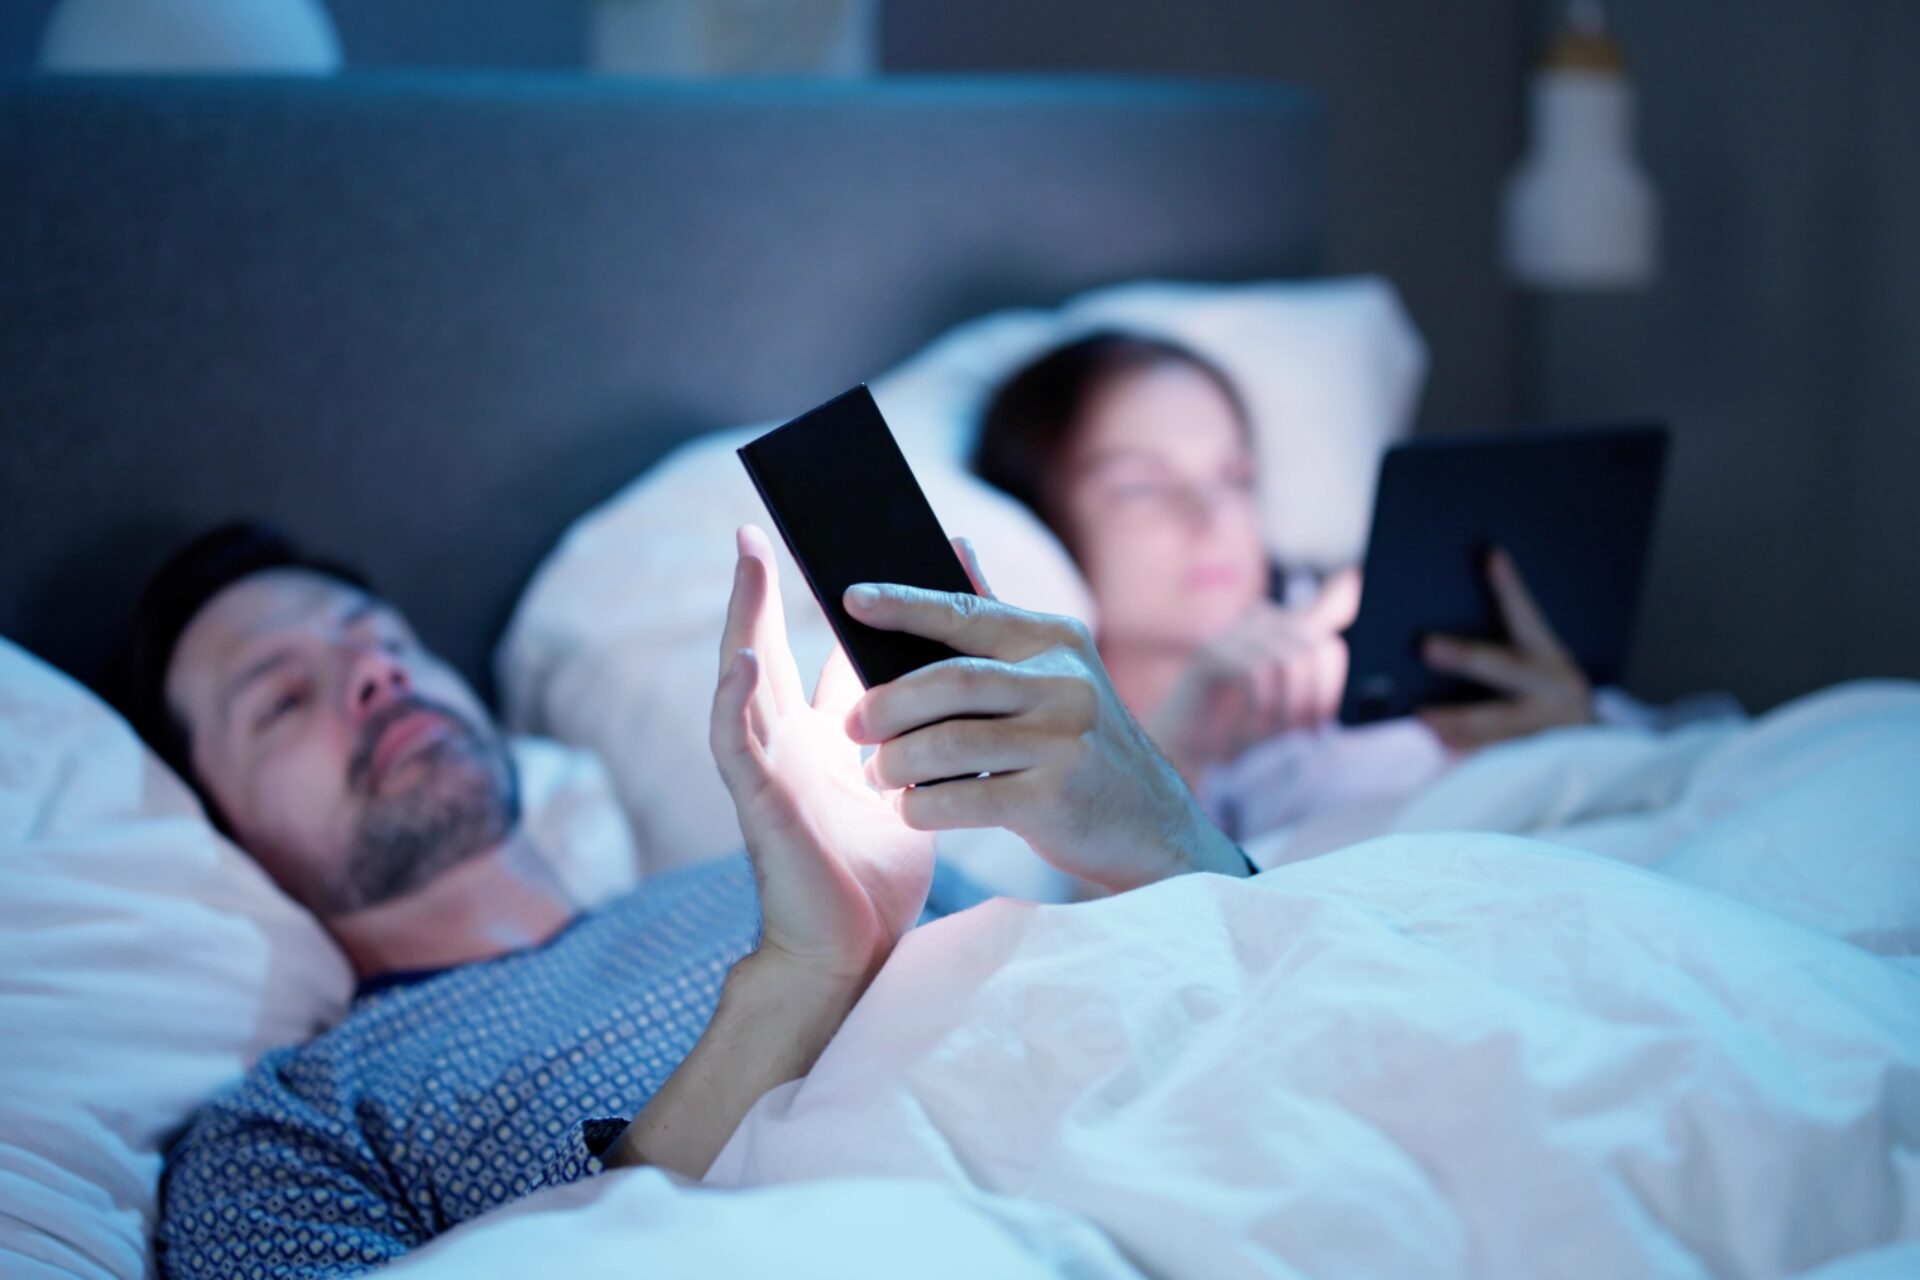 62224965-watching-cell-phone-before-sleep-at-night